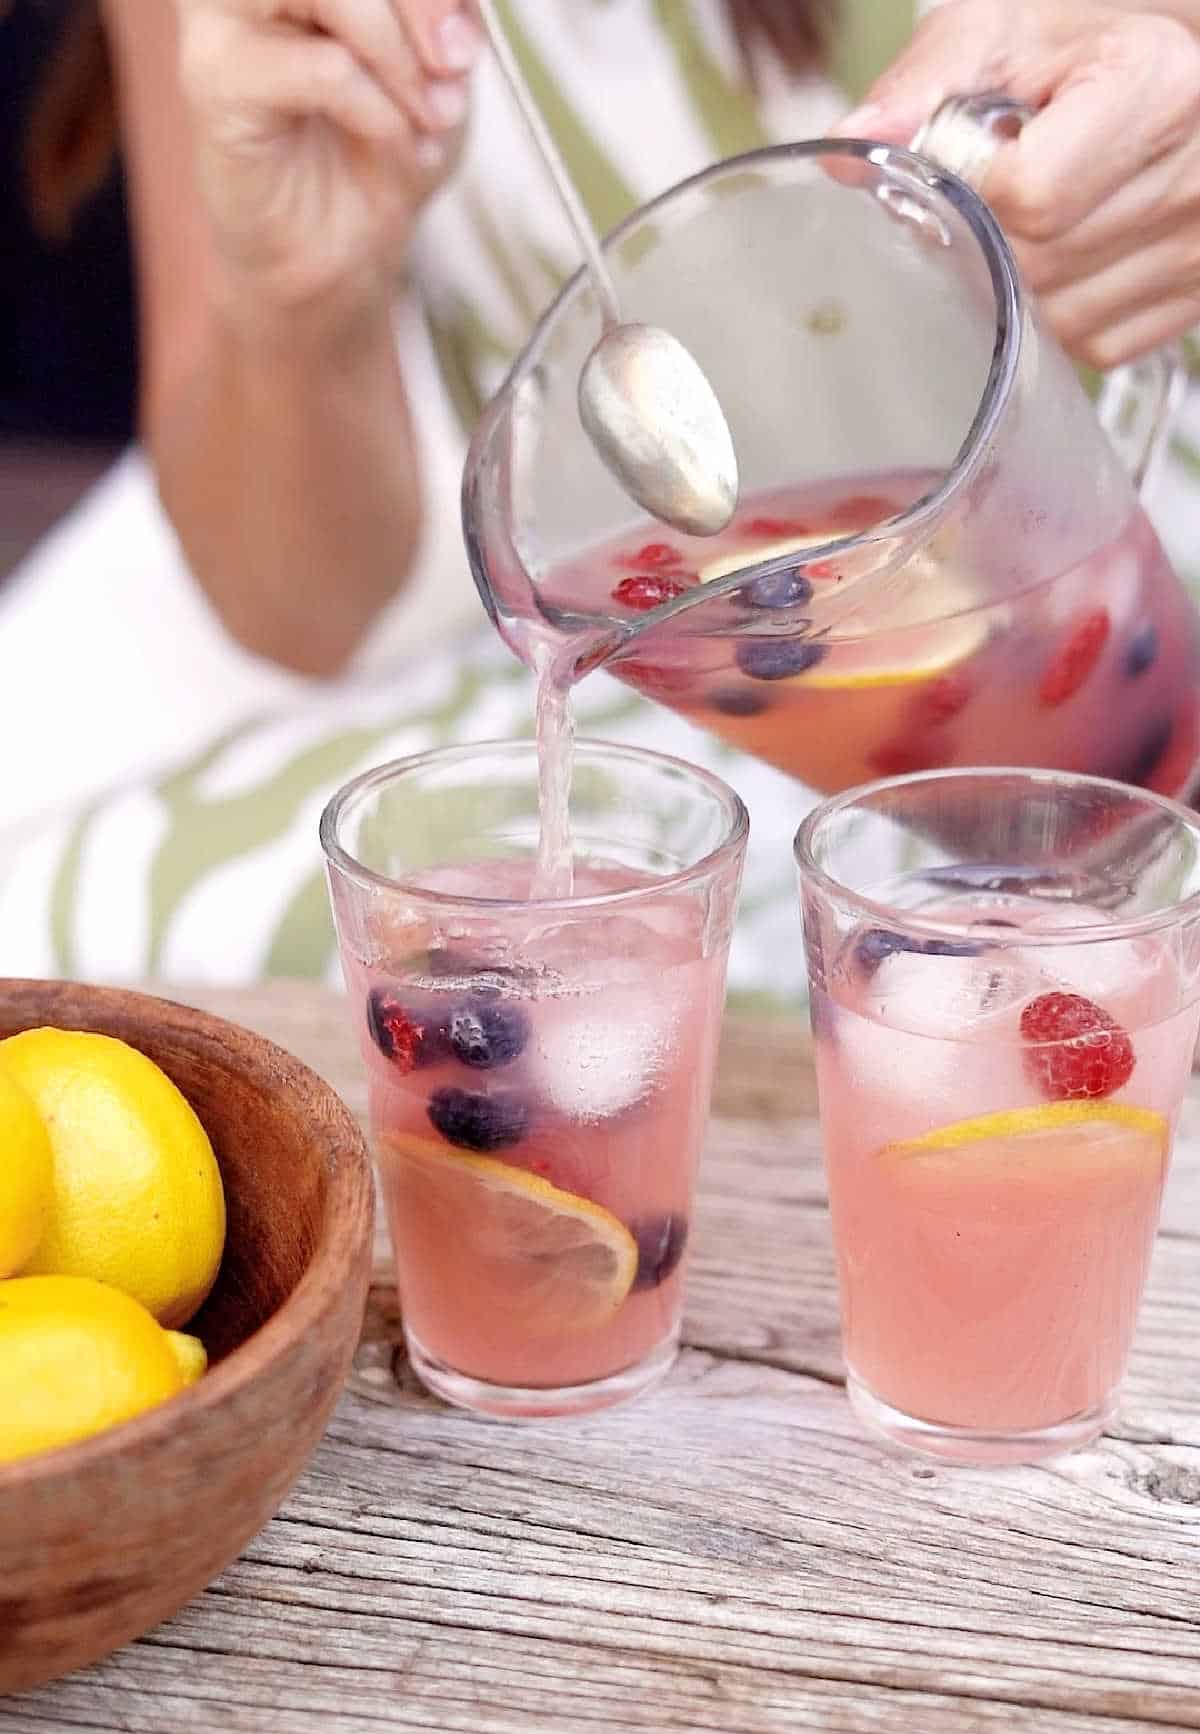 Serving pink lemonade from a pitcher into tall glasses. Wooden table, bowl with lemons. 